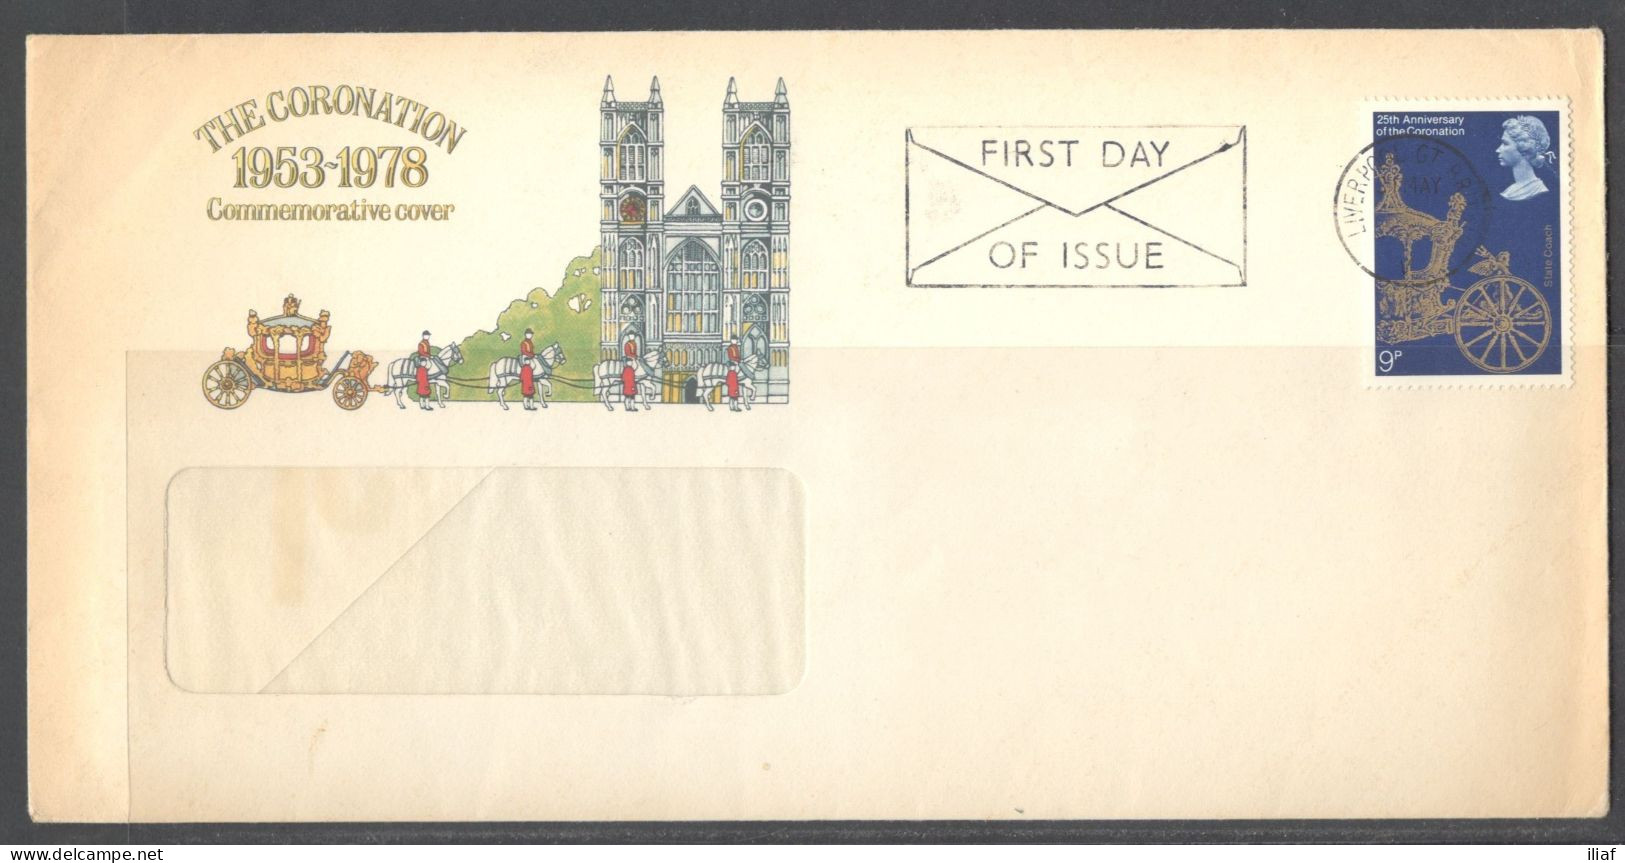 United Kingdom Of Great Britain. FDC Sc. 835.  25th Anniversary Of Coronation.  FDC Cancellation On FDC Envelope - 1971-1980 Decimal Issues